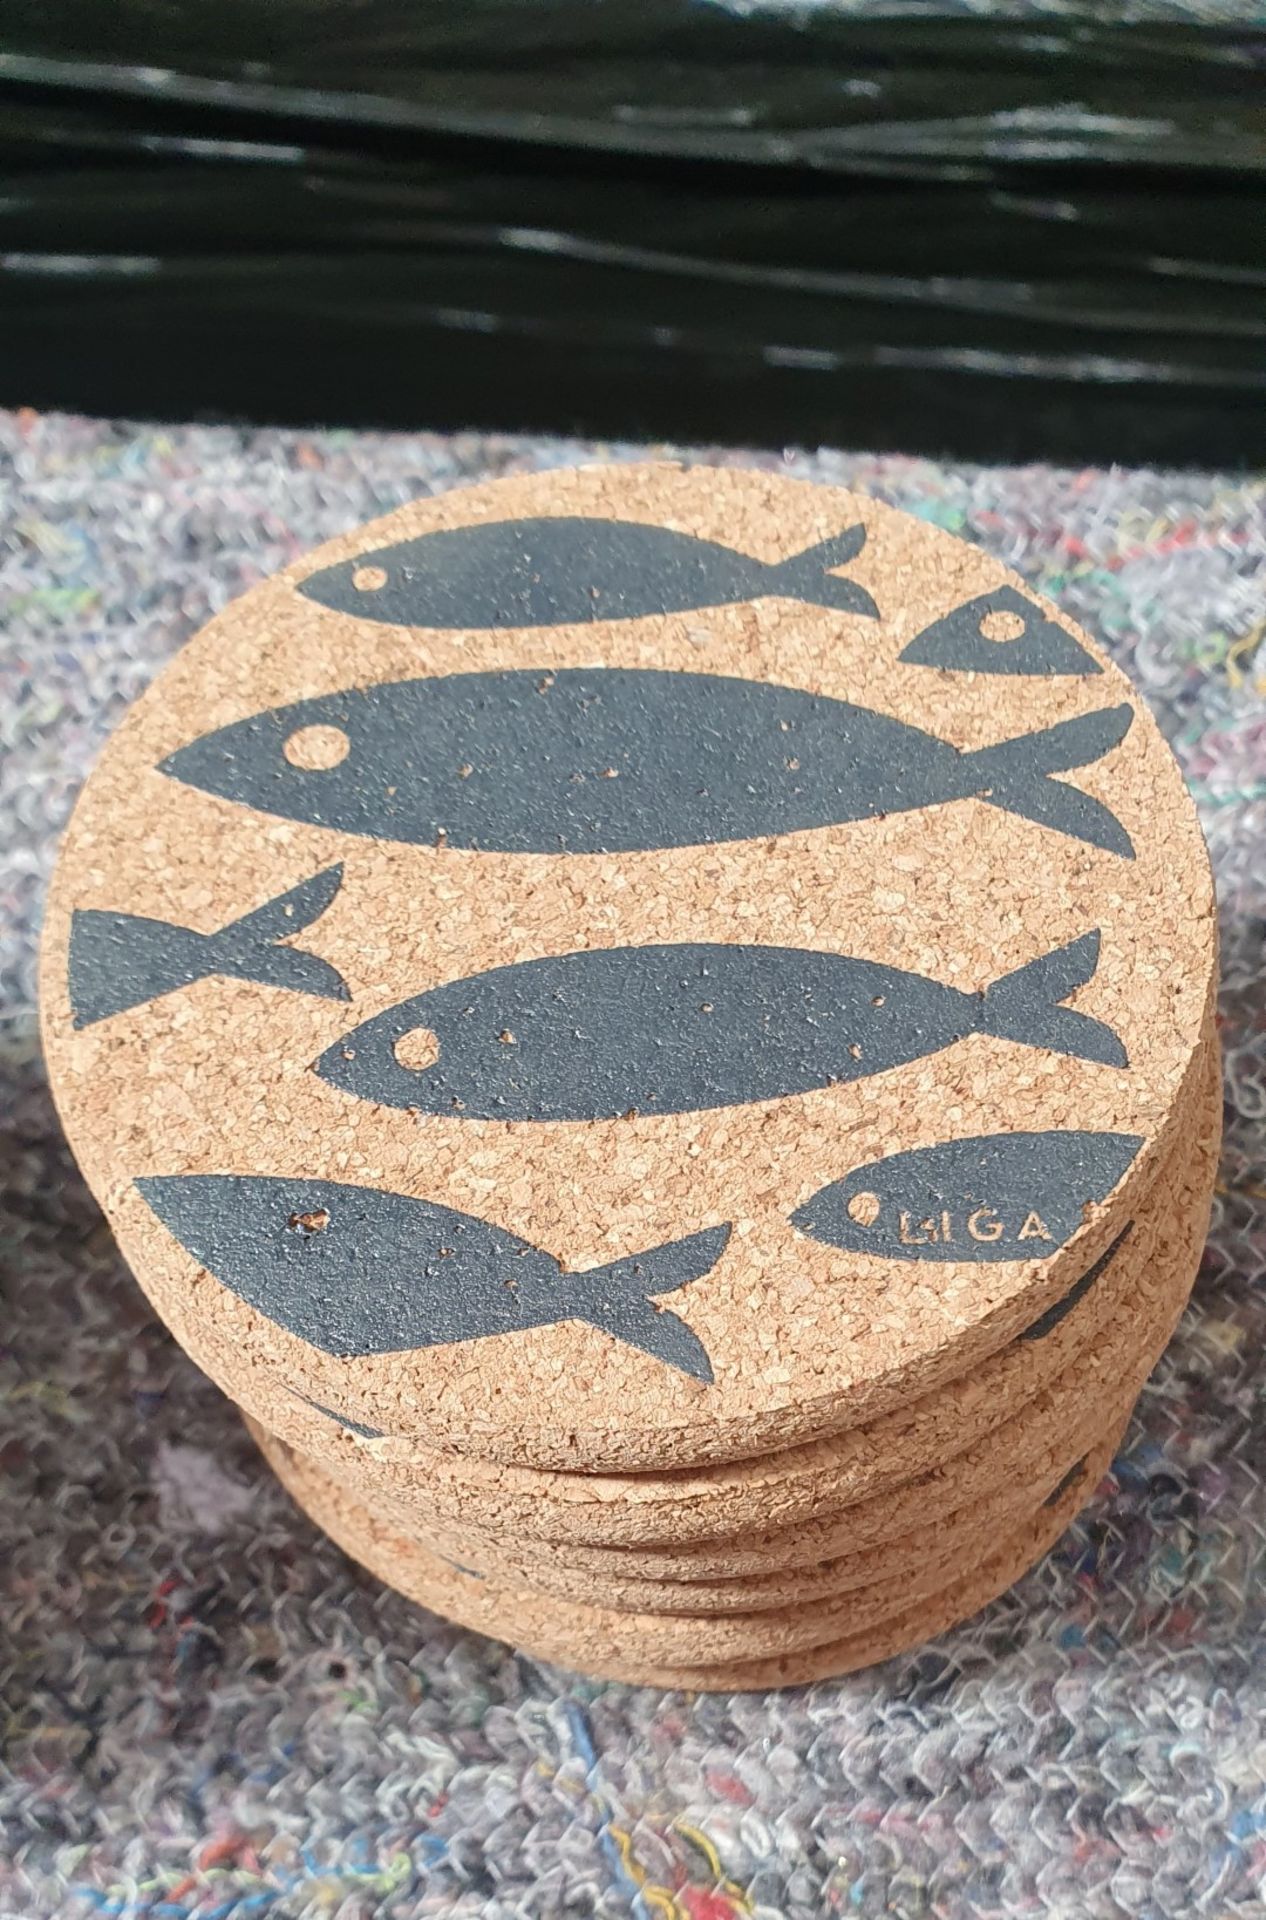 346 x Assorted Cork Placemats, Cork Coasters, Cork Fish, Cork Candle Holders and More - Includes - Image 21 of 33